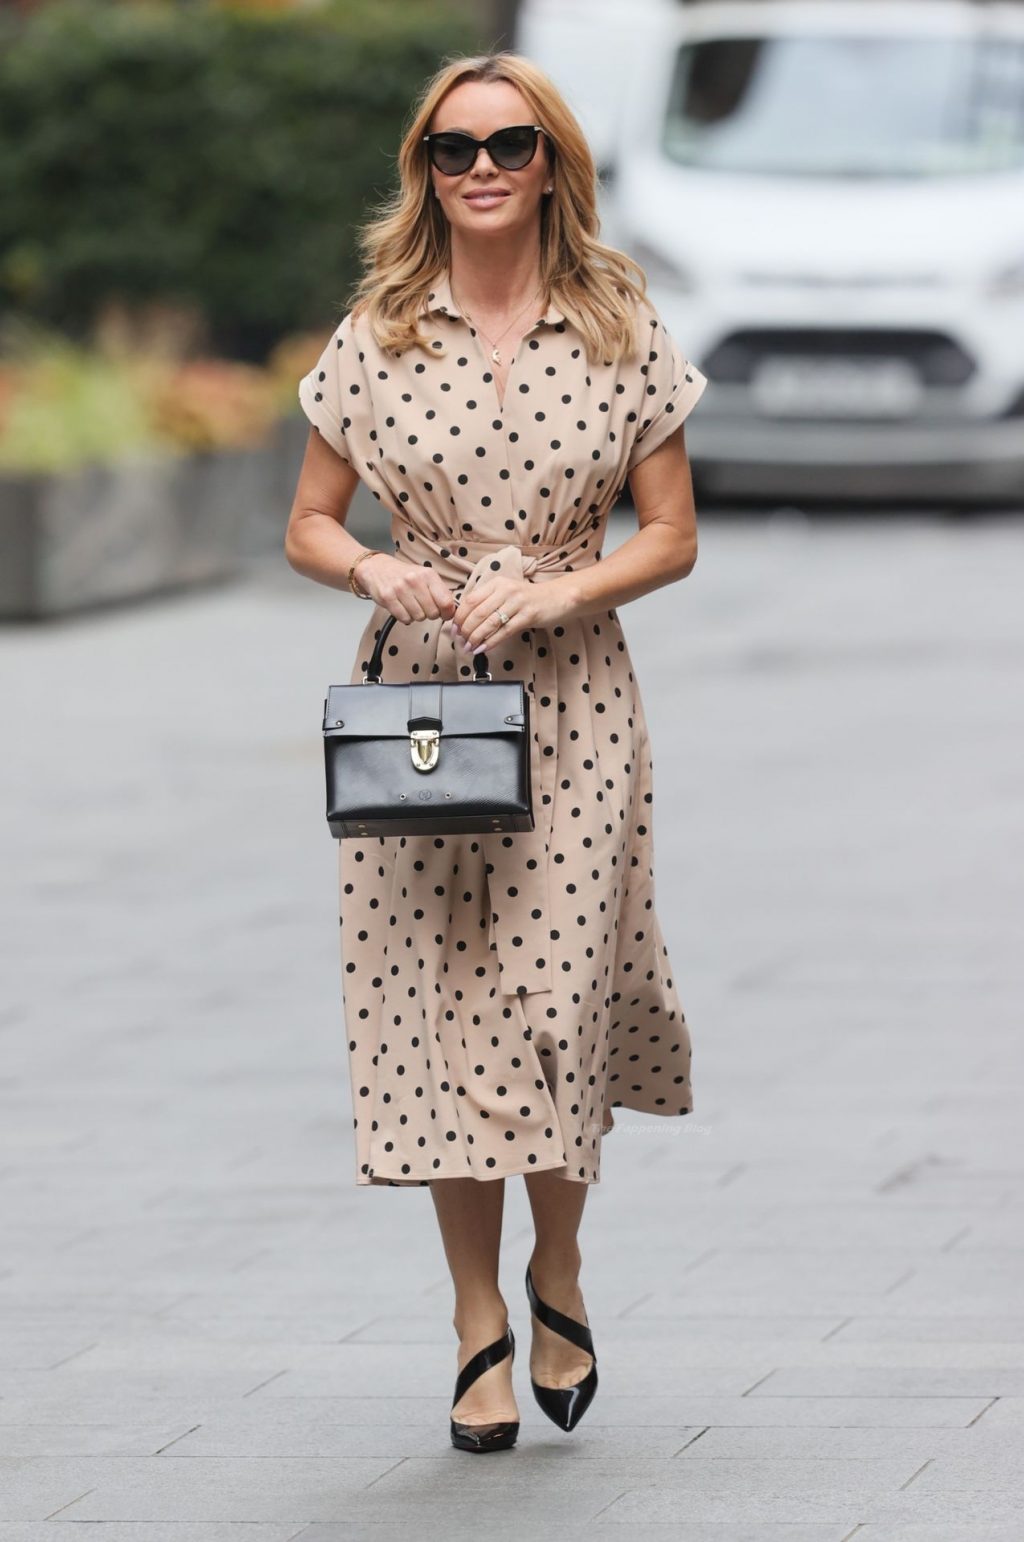 Amanda Holden is Pictured Leaving the Global Studios (30 Photos)